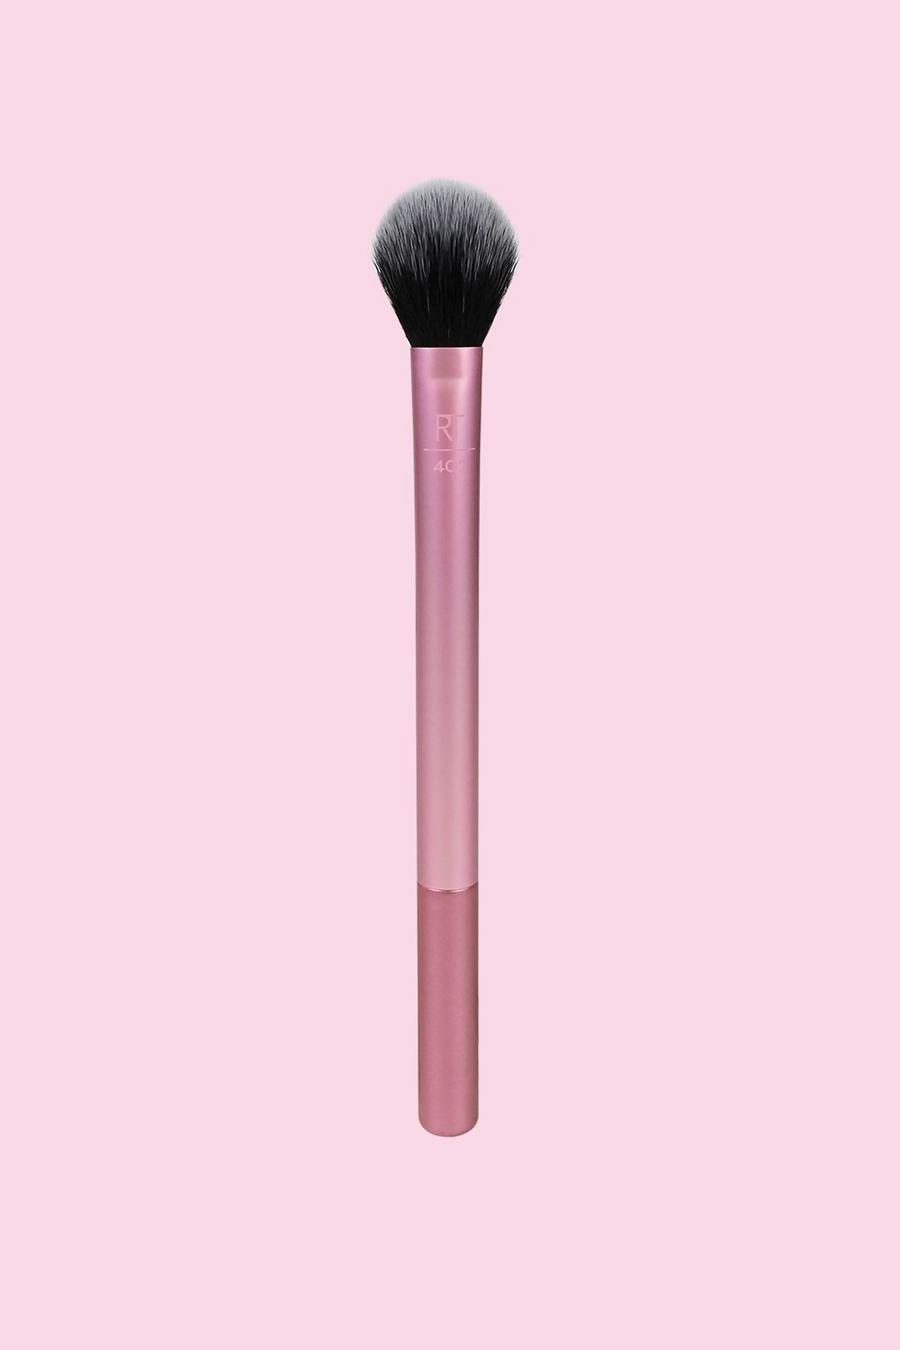 Pink REAL TECHNIQUES UNDER EYE SETTING POWDER MAKEUP BRUSH